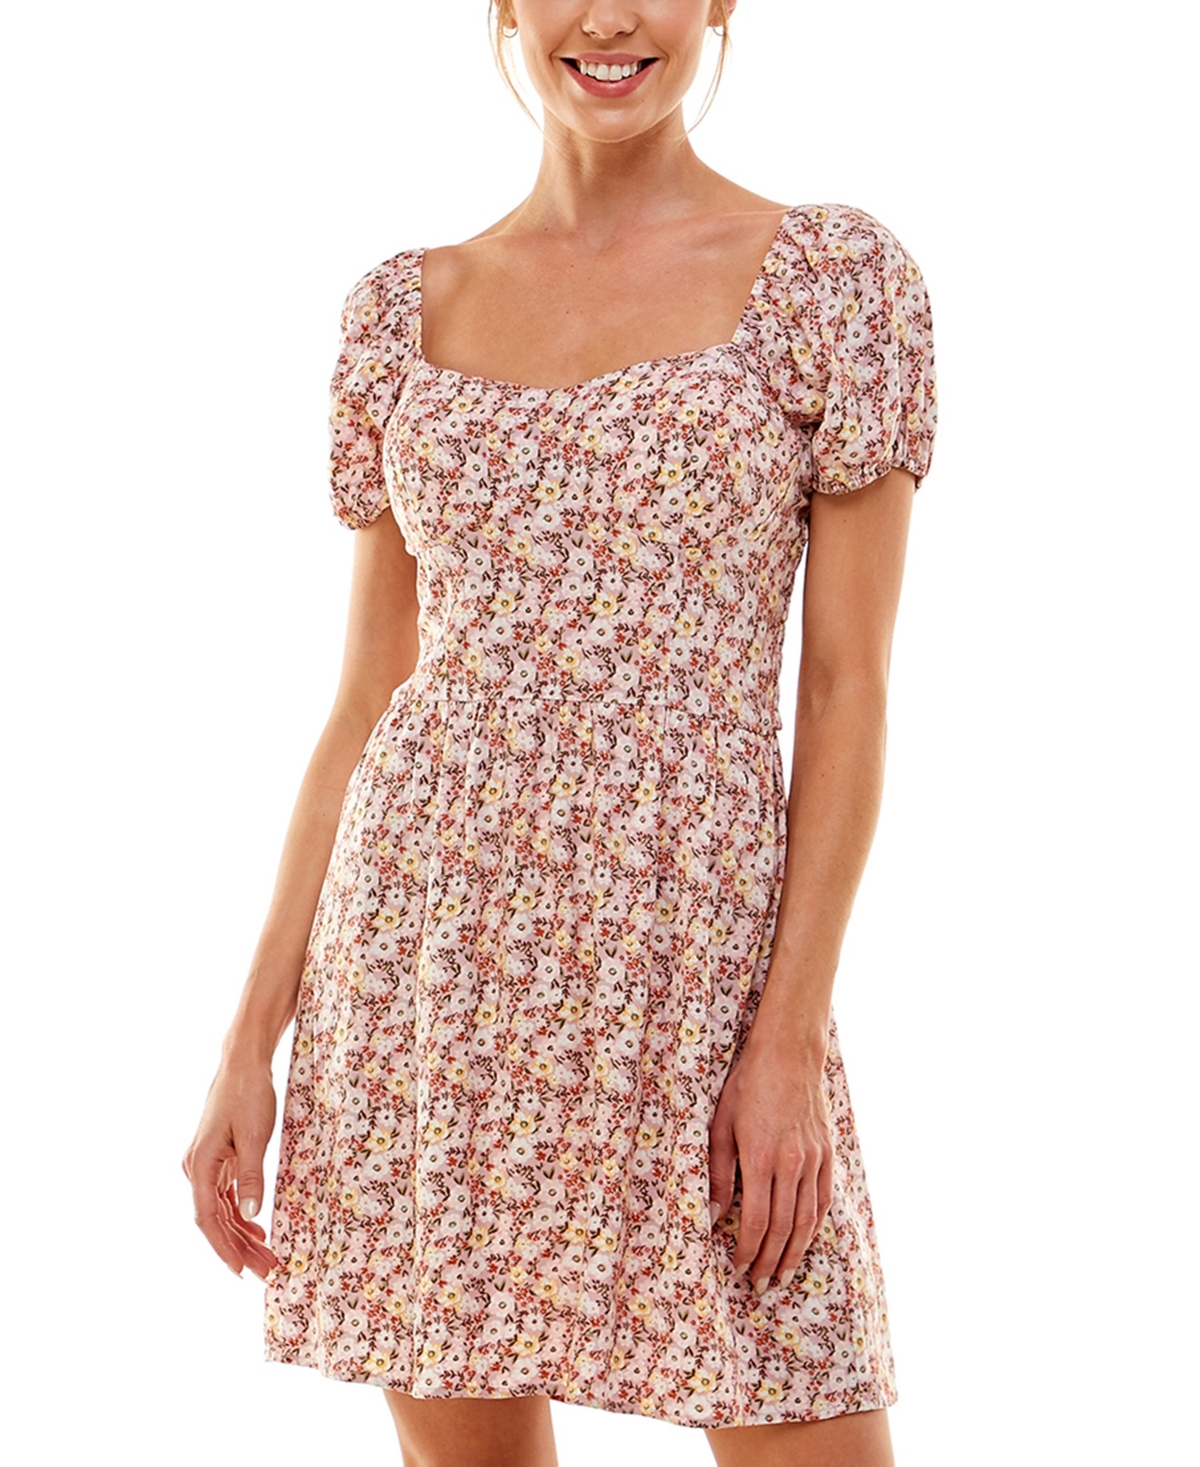 As You Wish Juniors' Puff-Sleeve Dress - Rose Floral